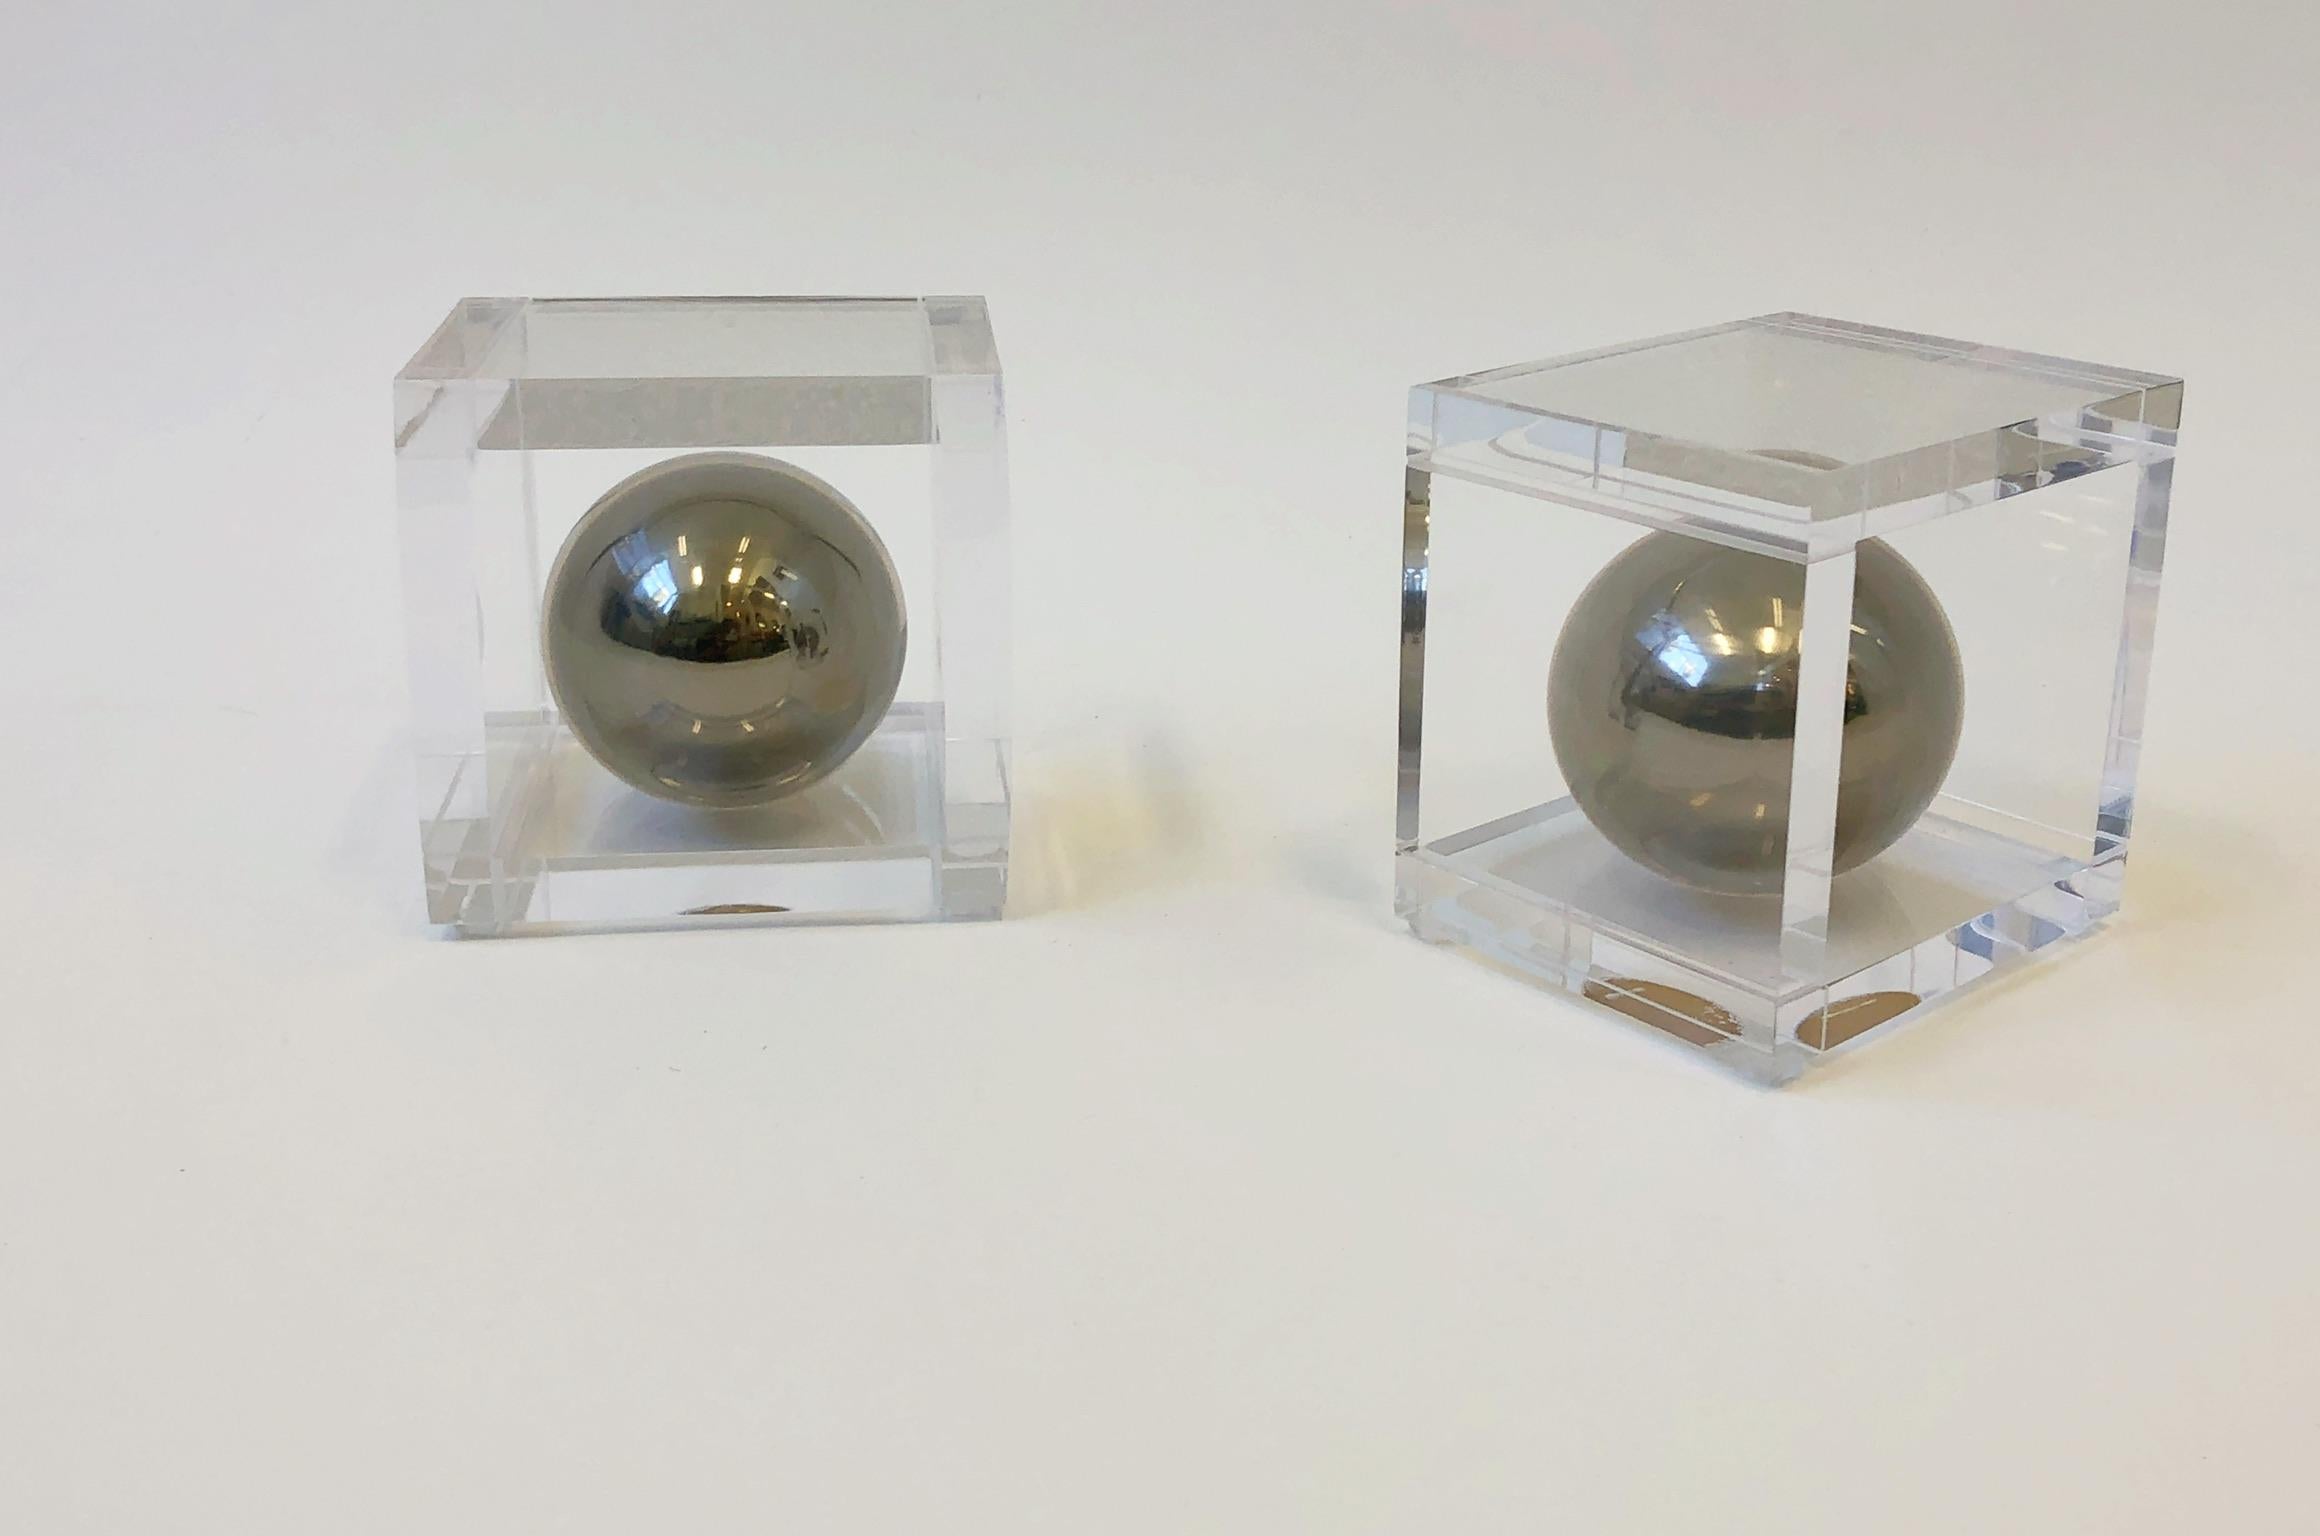 A glamorous pair of clear Lucite and polish chrome bookends by renowned American designer Charles Hollis Jones. This are part of the “Ball Line” originally design in the 1970s
The chrome sphere is covered by clear acrylic. 

Dimensions each: 6”